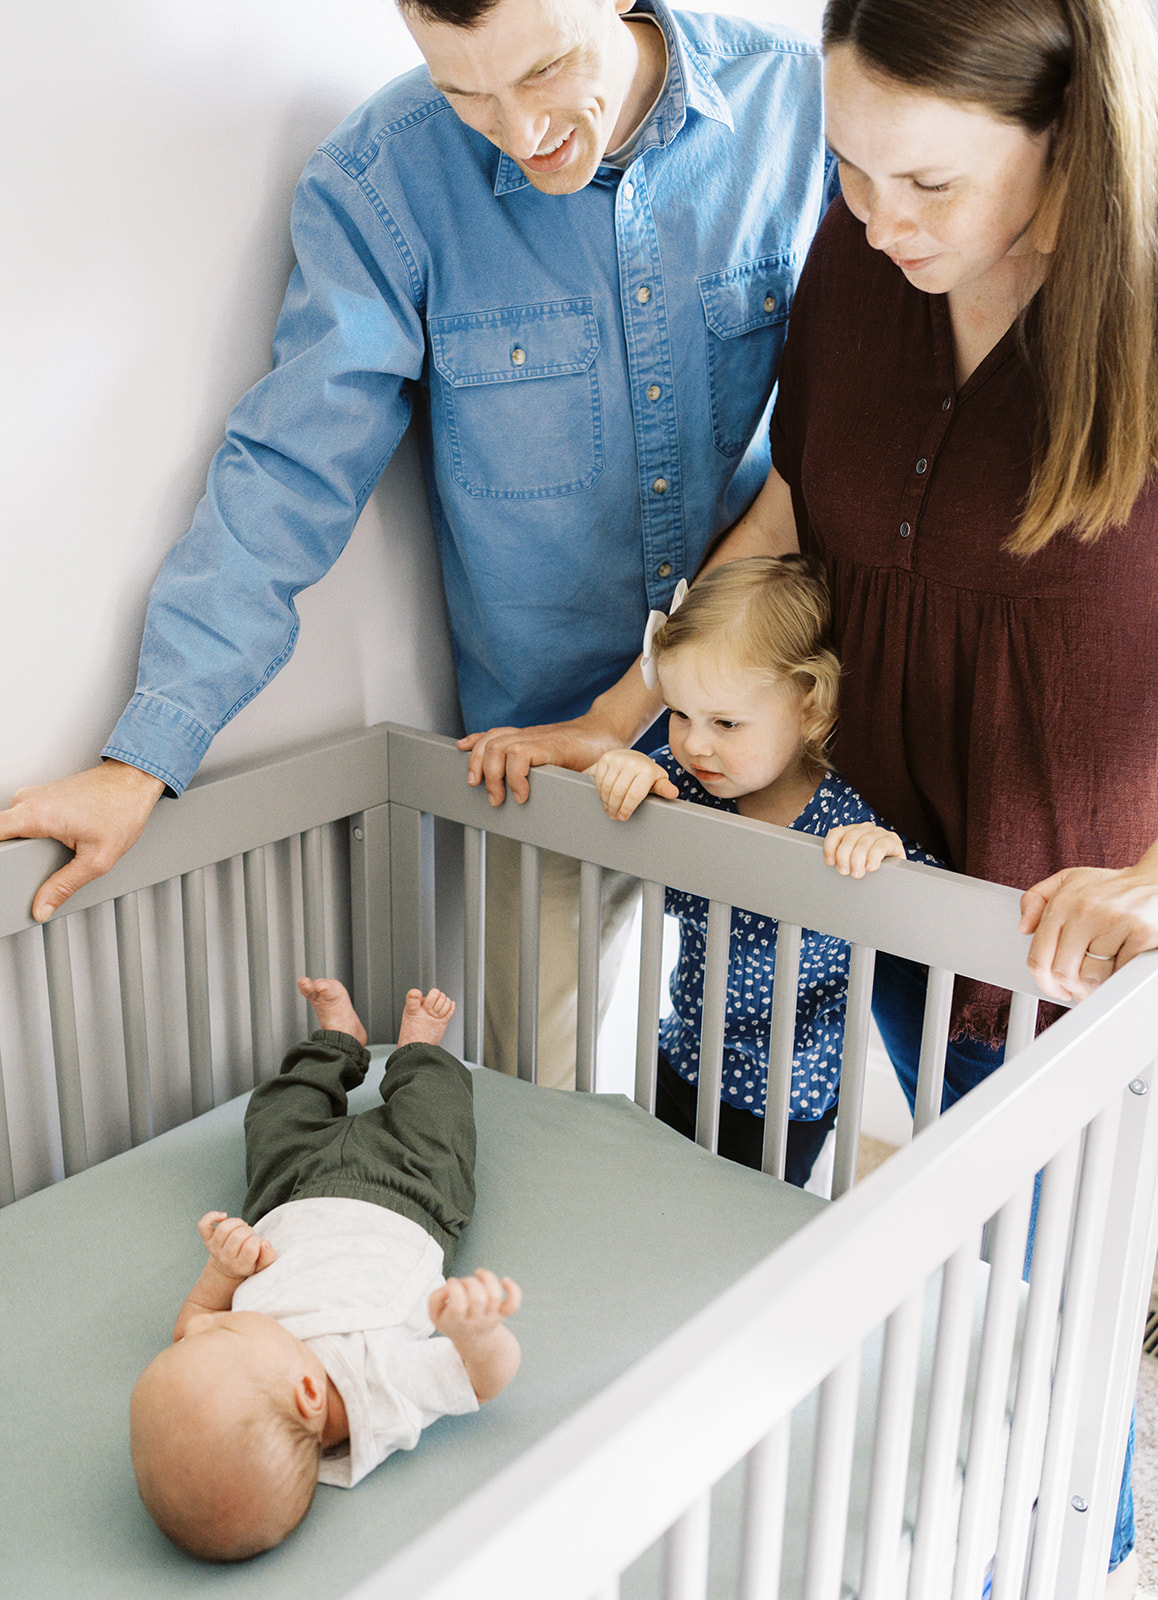 The family looks over the crib at the newborn baby boy during a family lifestyle photography session